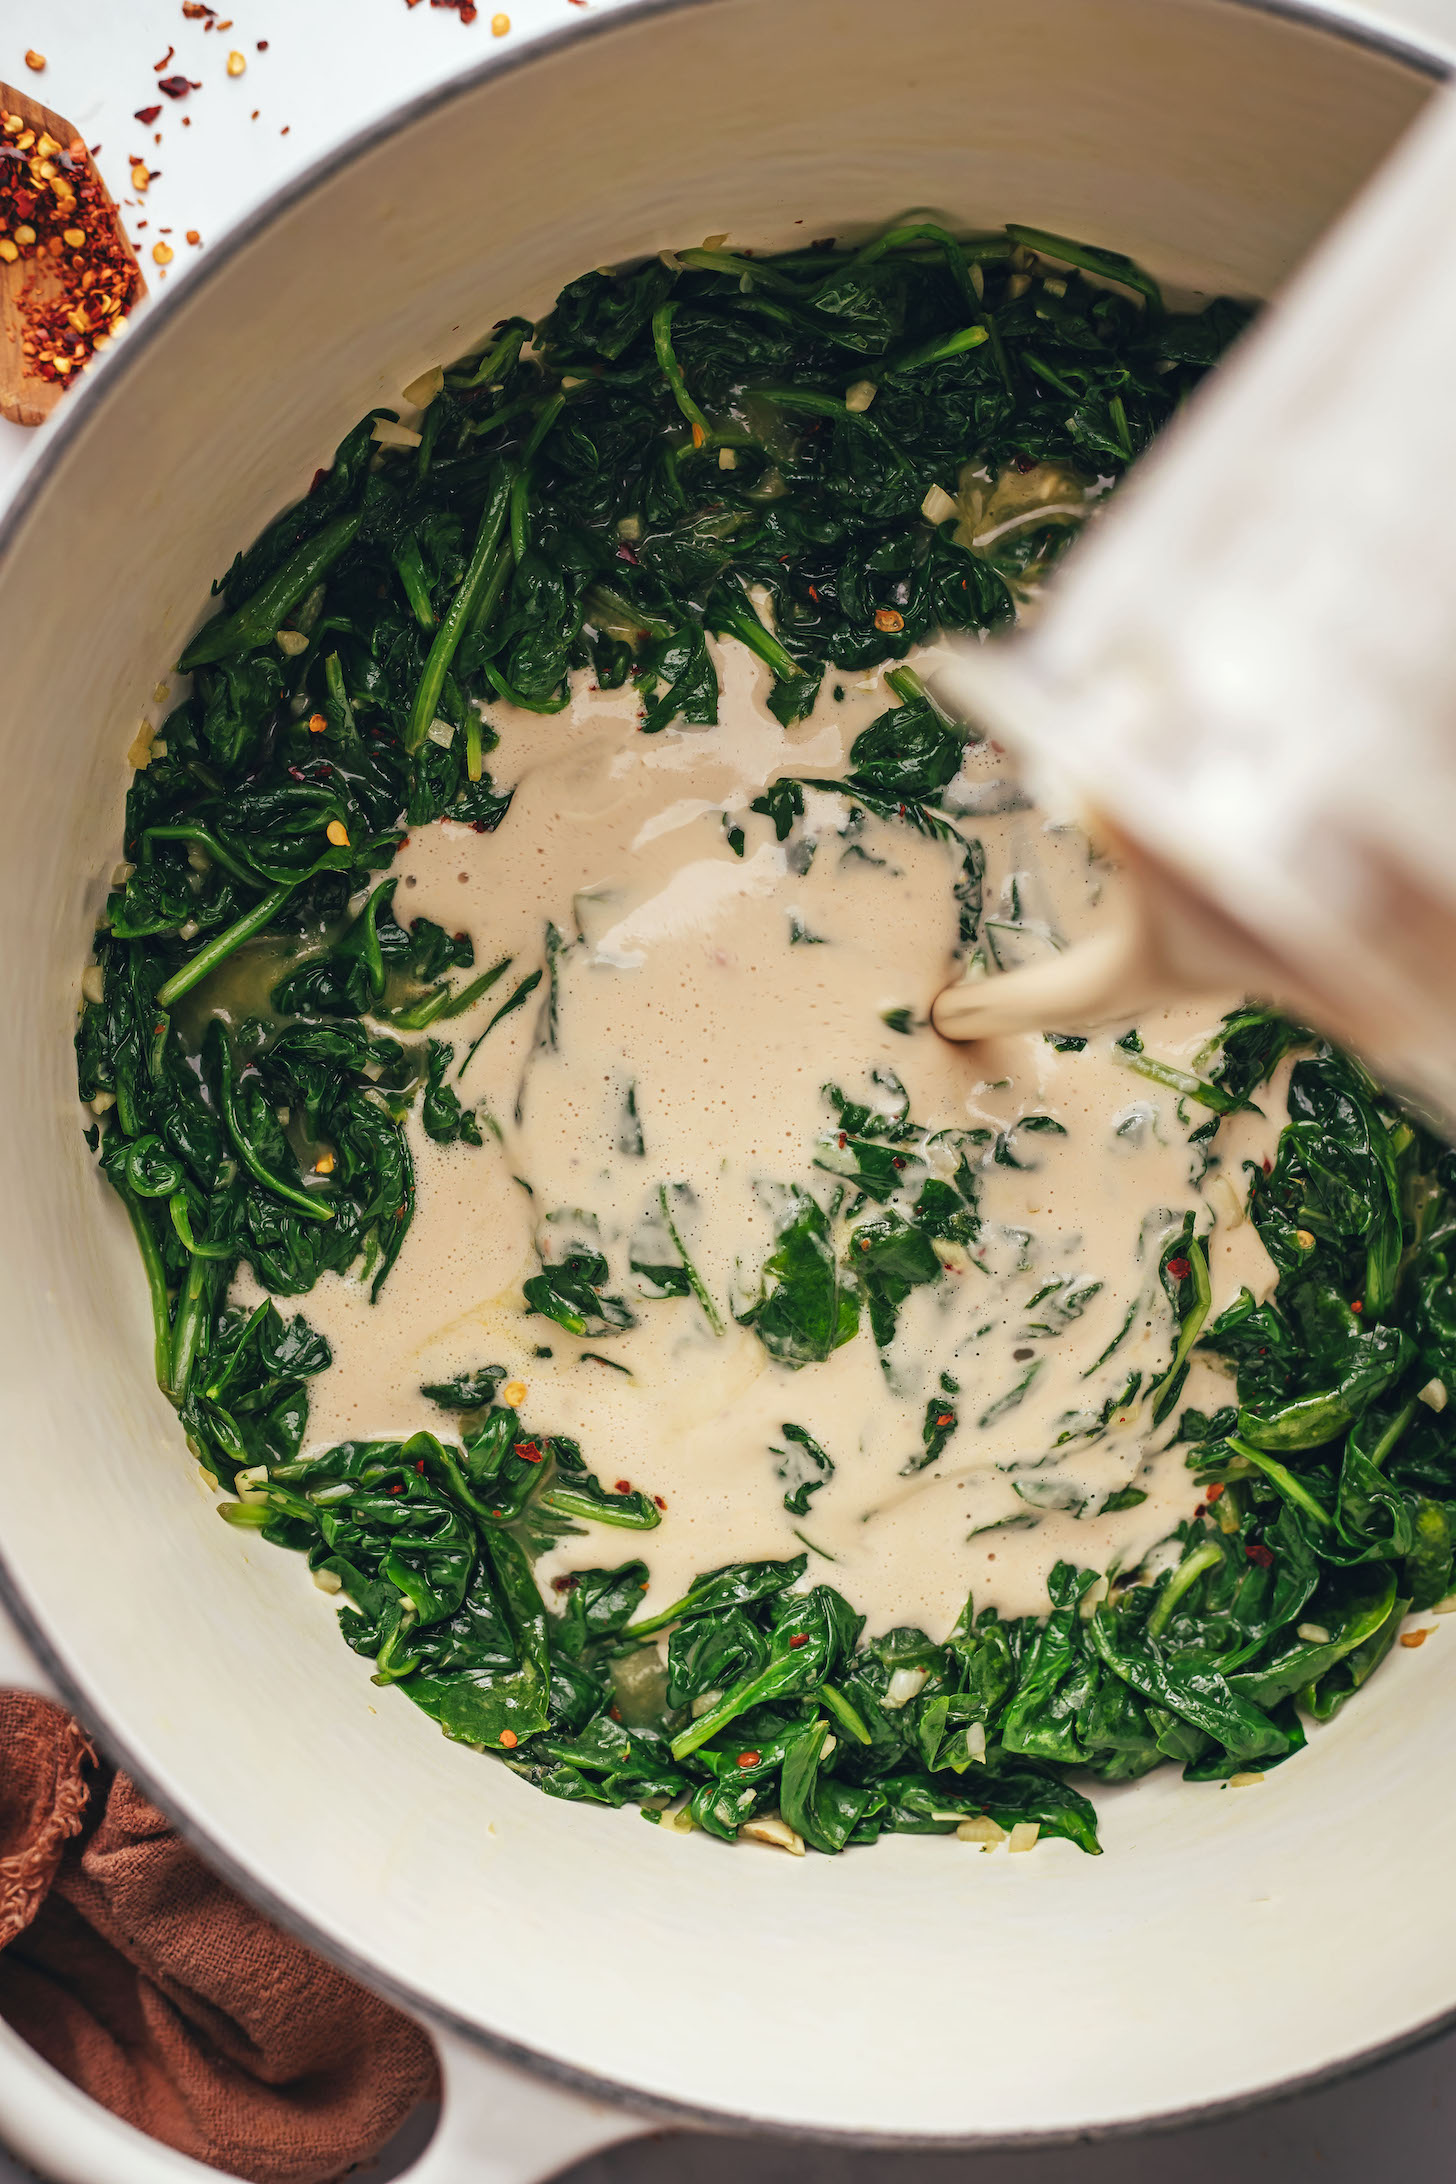 Pouring a creamy cashew-based sauce over sautéed spinach